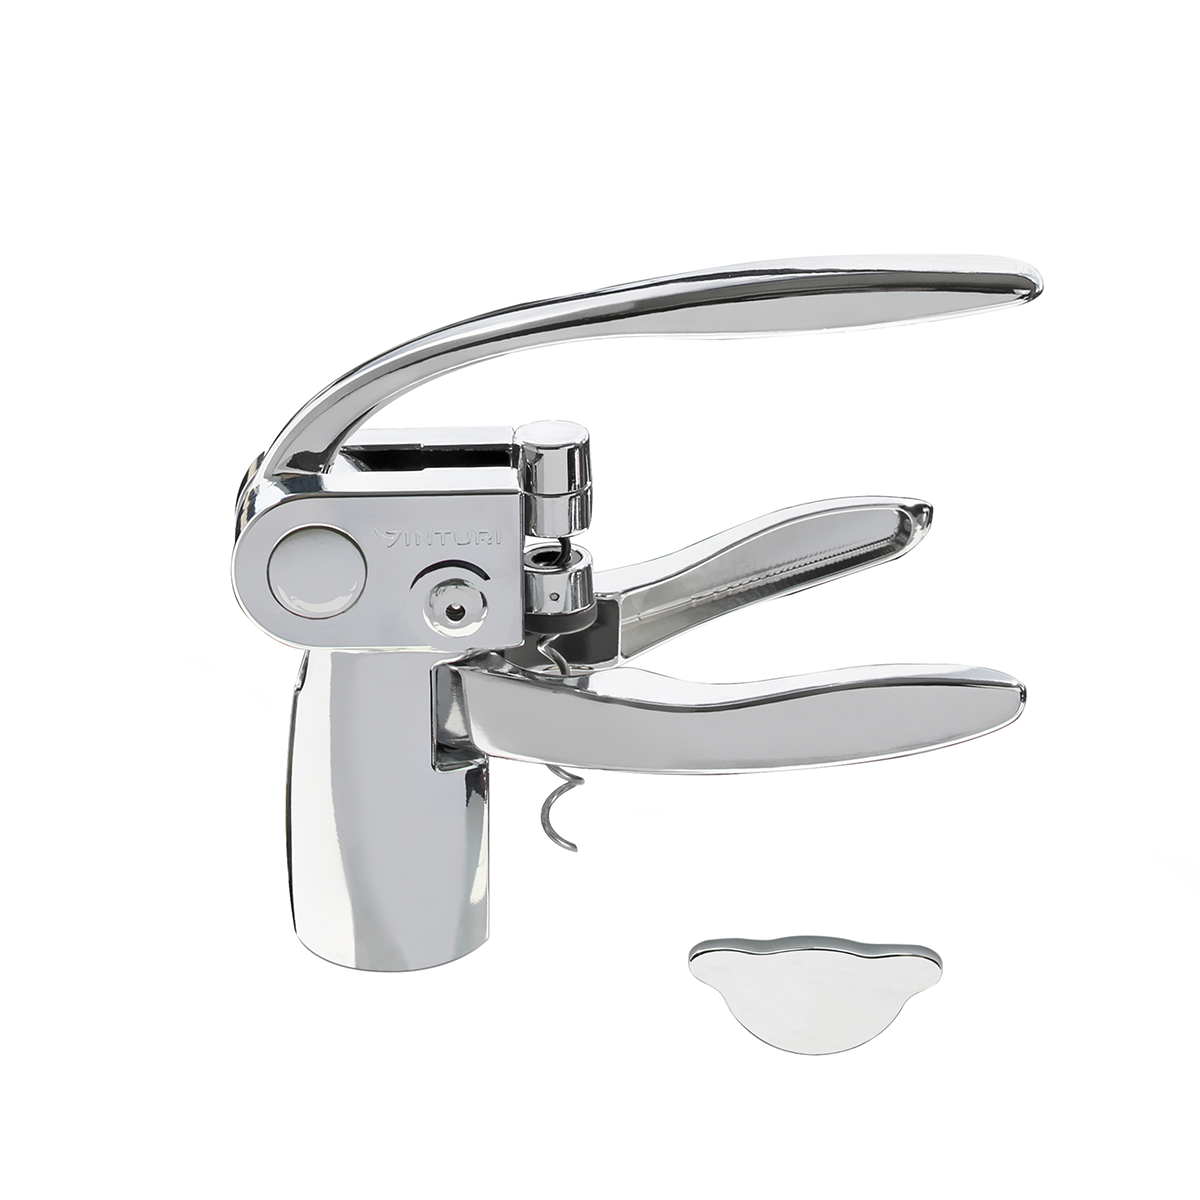 Vinturi Traditional Lever Wine Opener with Replacement Screw and Foil  Cutter, in Chrome (V9030)